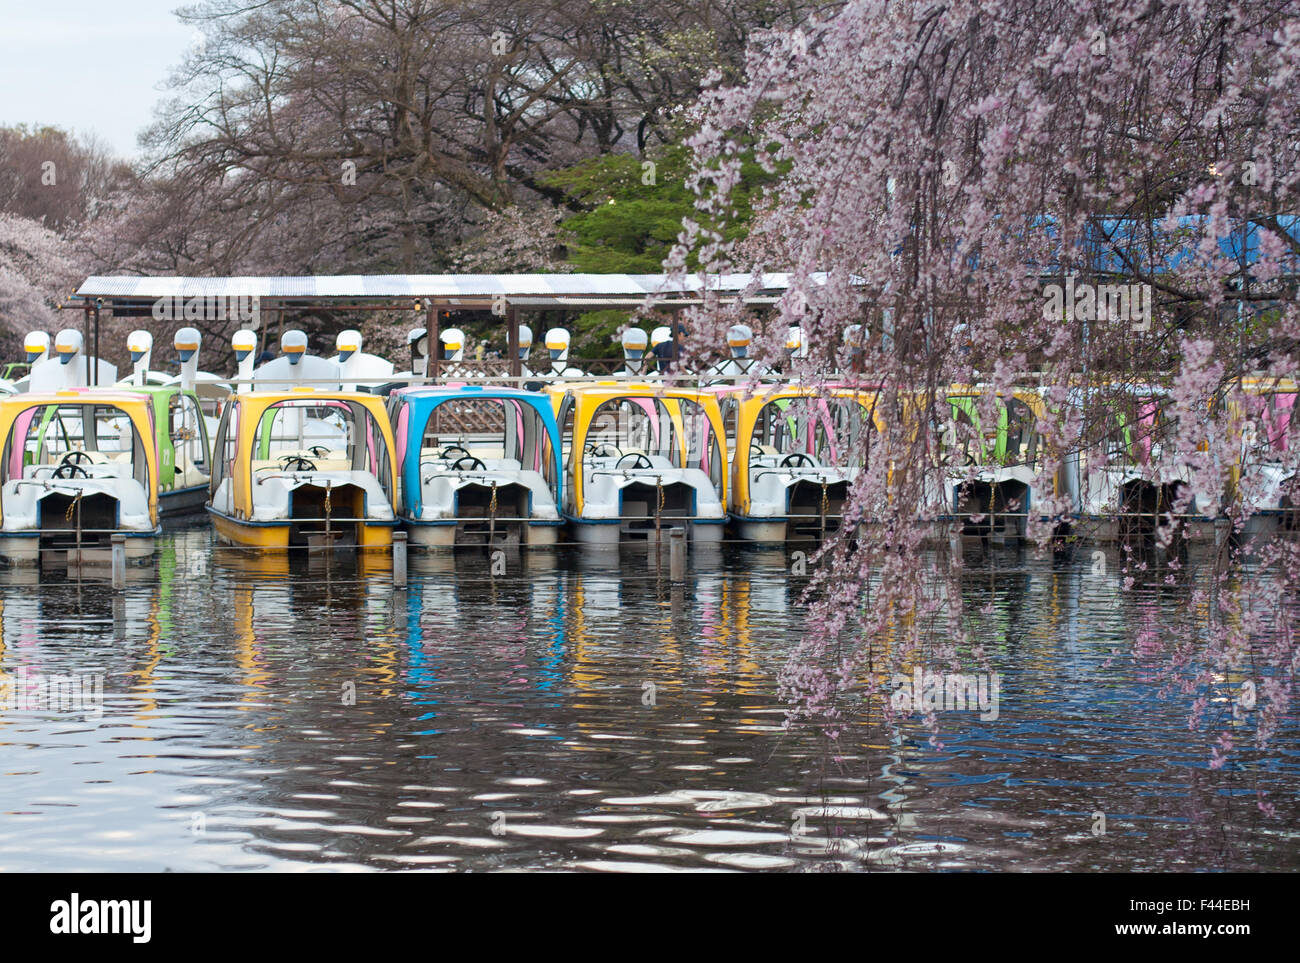 Colorful swan boats docked with cherry blossom sakura in foreground Stock Photo